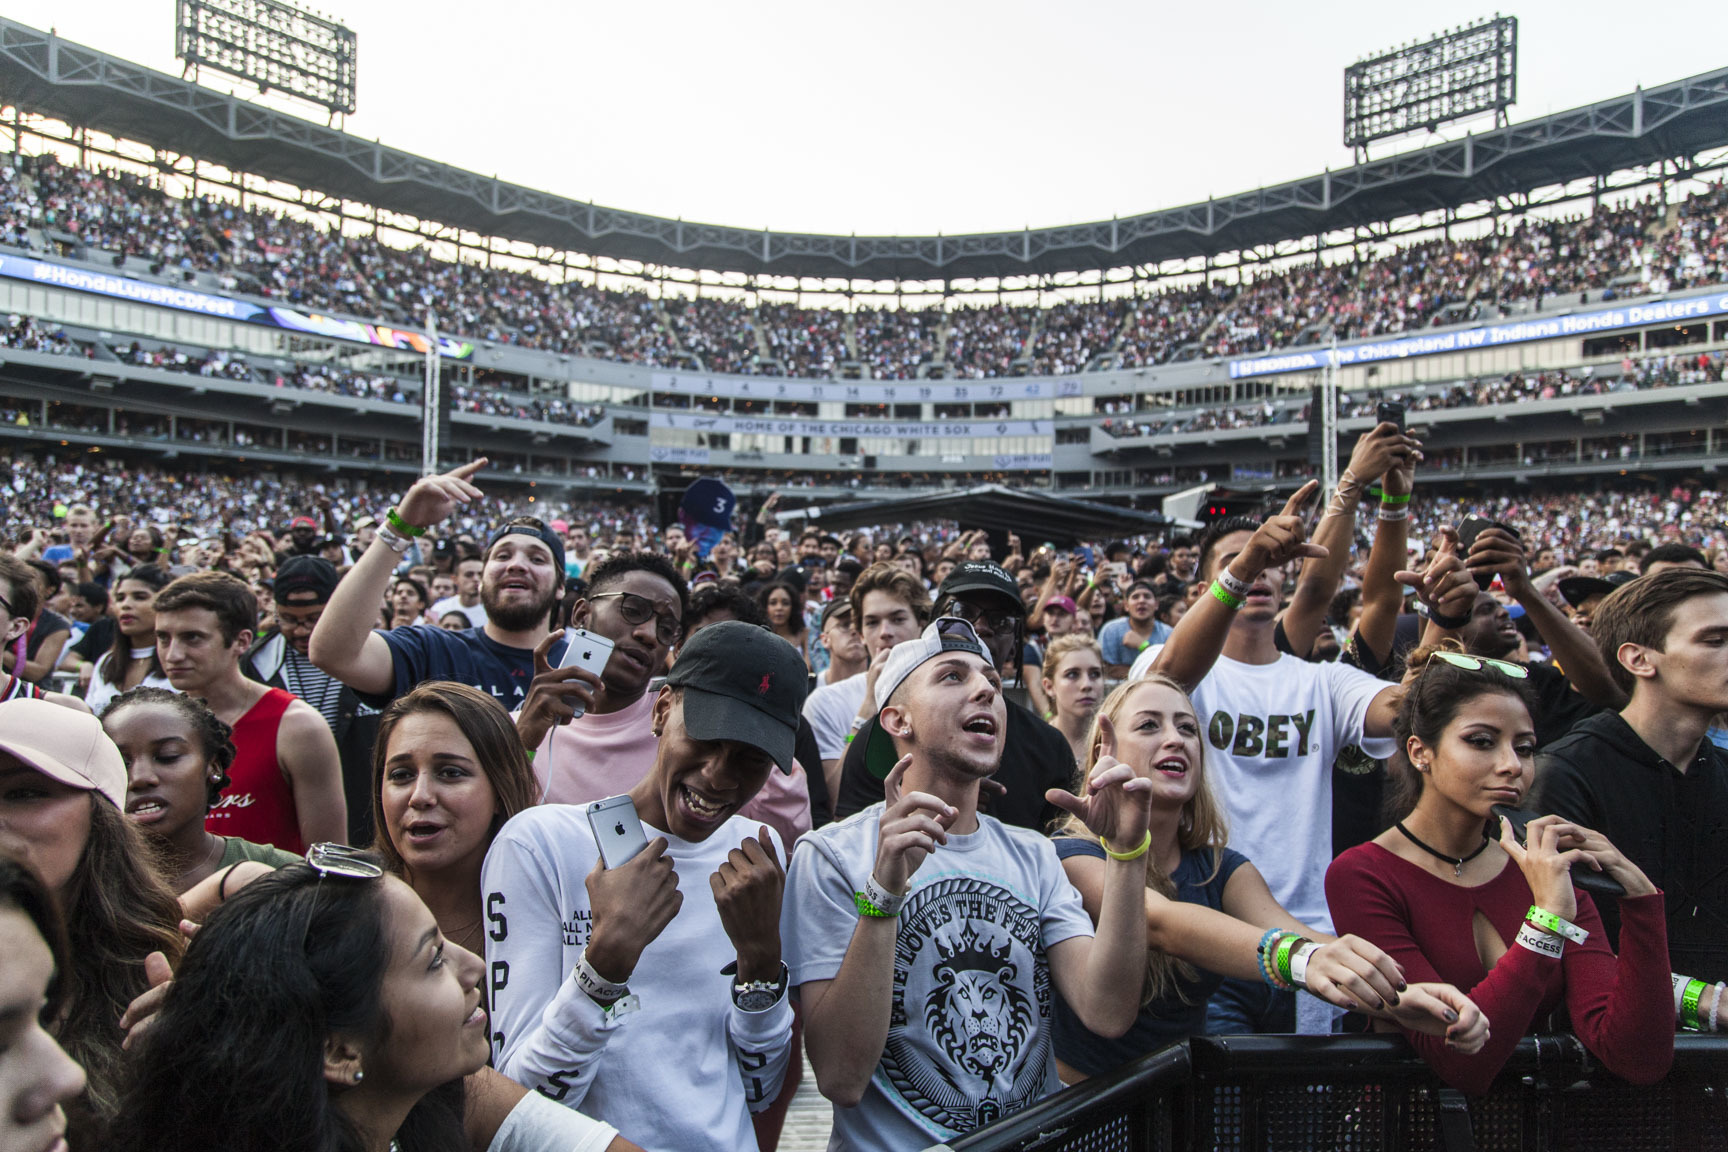 A new music festival could be headed to Guaranteed Rate Field in 2017